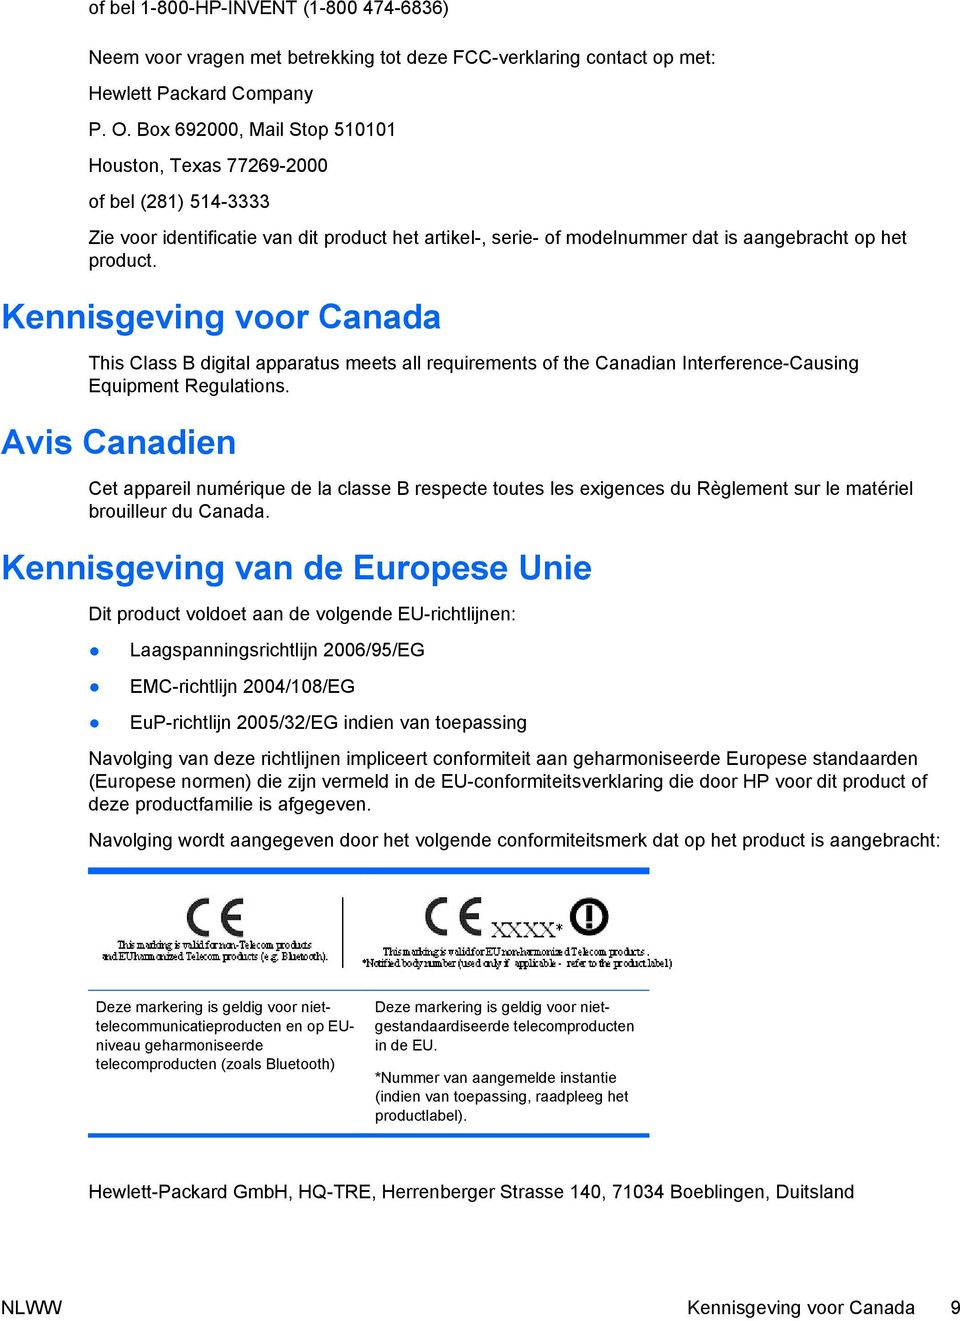 Kennisgeving voor Canada This Class B digital apparatus meets all requirements of the Canadian Interference-Causing Equipment Regulations.